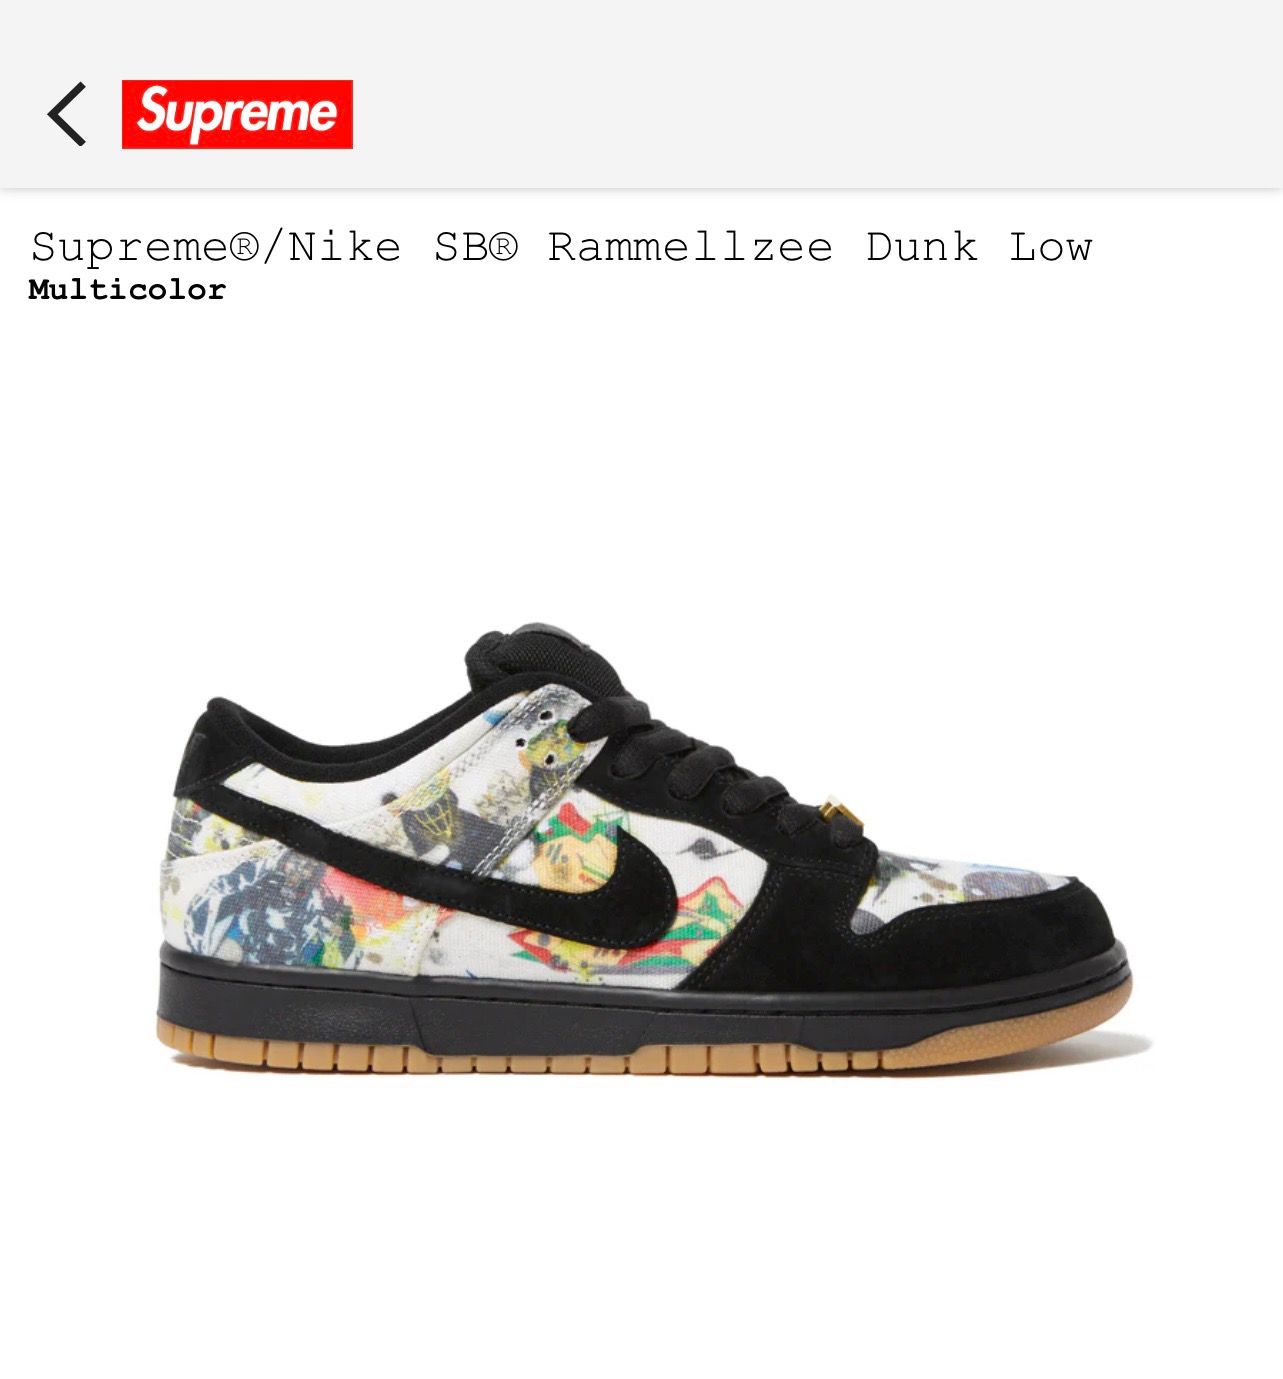 Pre-owned Nike X Supreme Nike Sb X Rammellzee Dunk Low Size 12 Multicolor Shoes